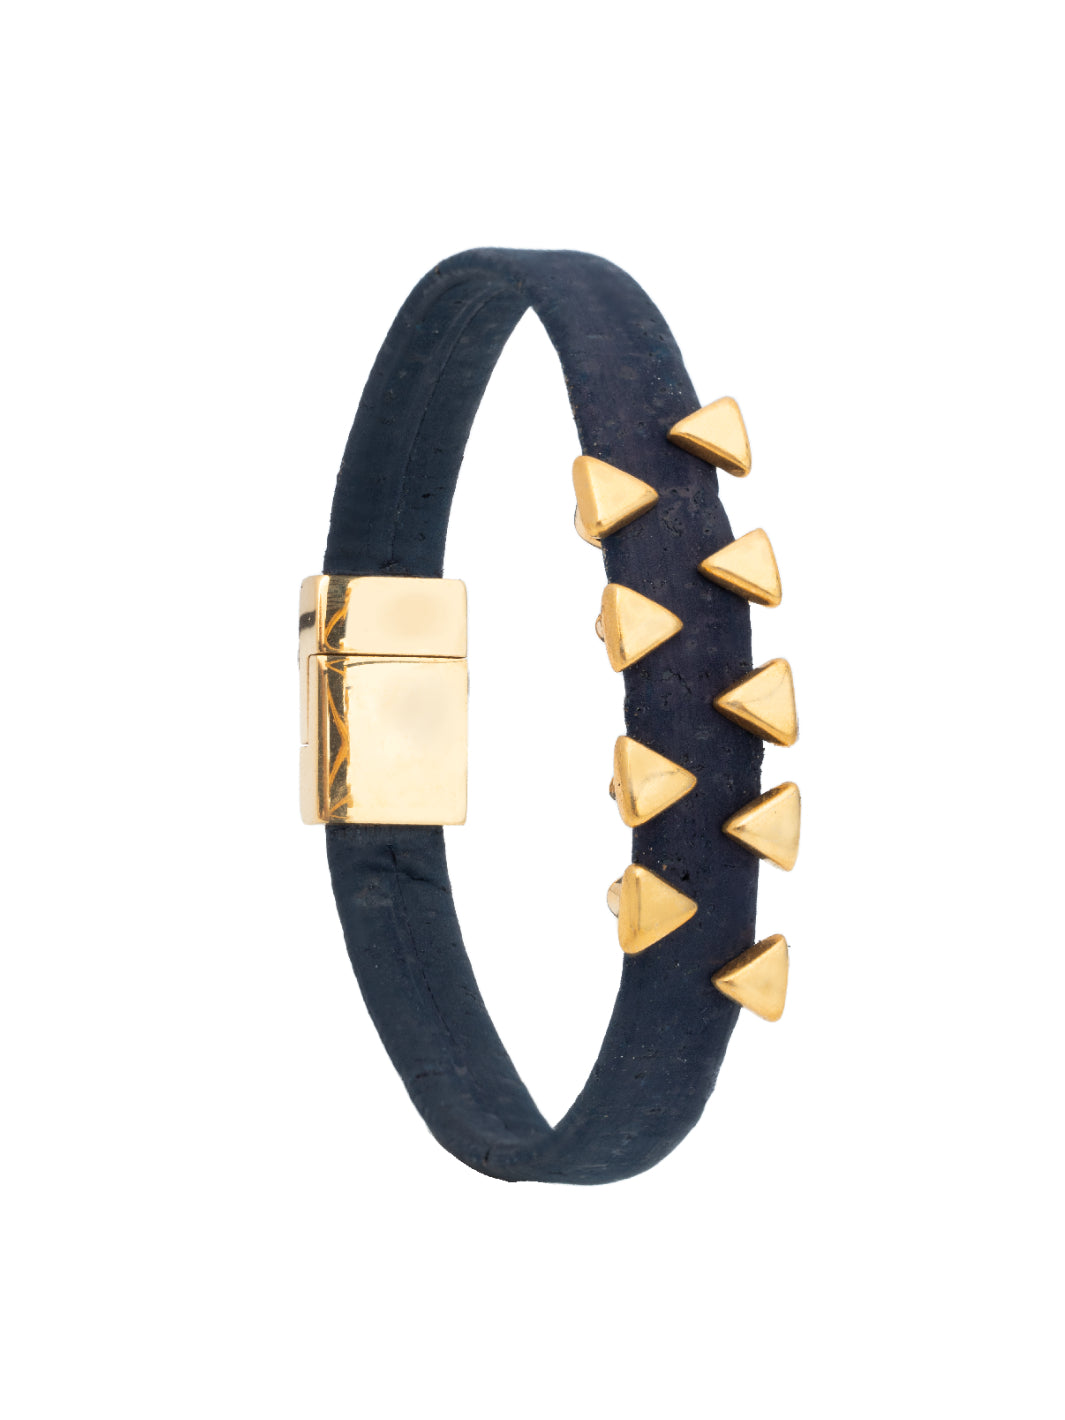 Introducing the GOLD SHARK TOOTH Cork Bracelet: bold navy-blue paired with luxurious gold, secured with a magnetic clasp for easy wear. A striking statement of elegance at just 14g.